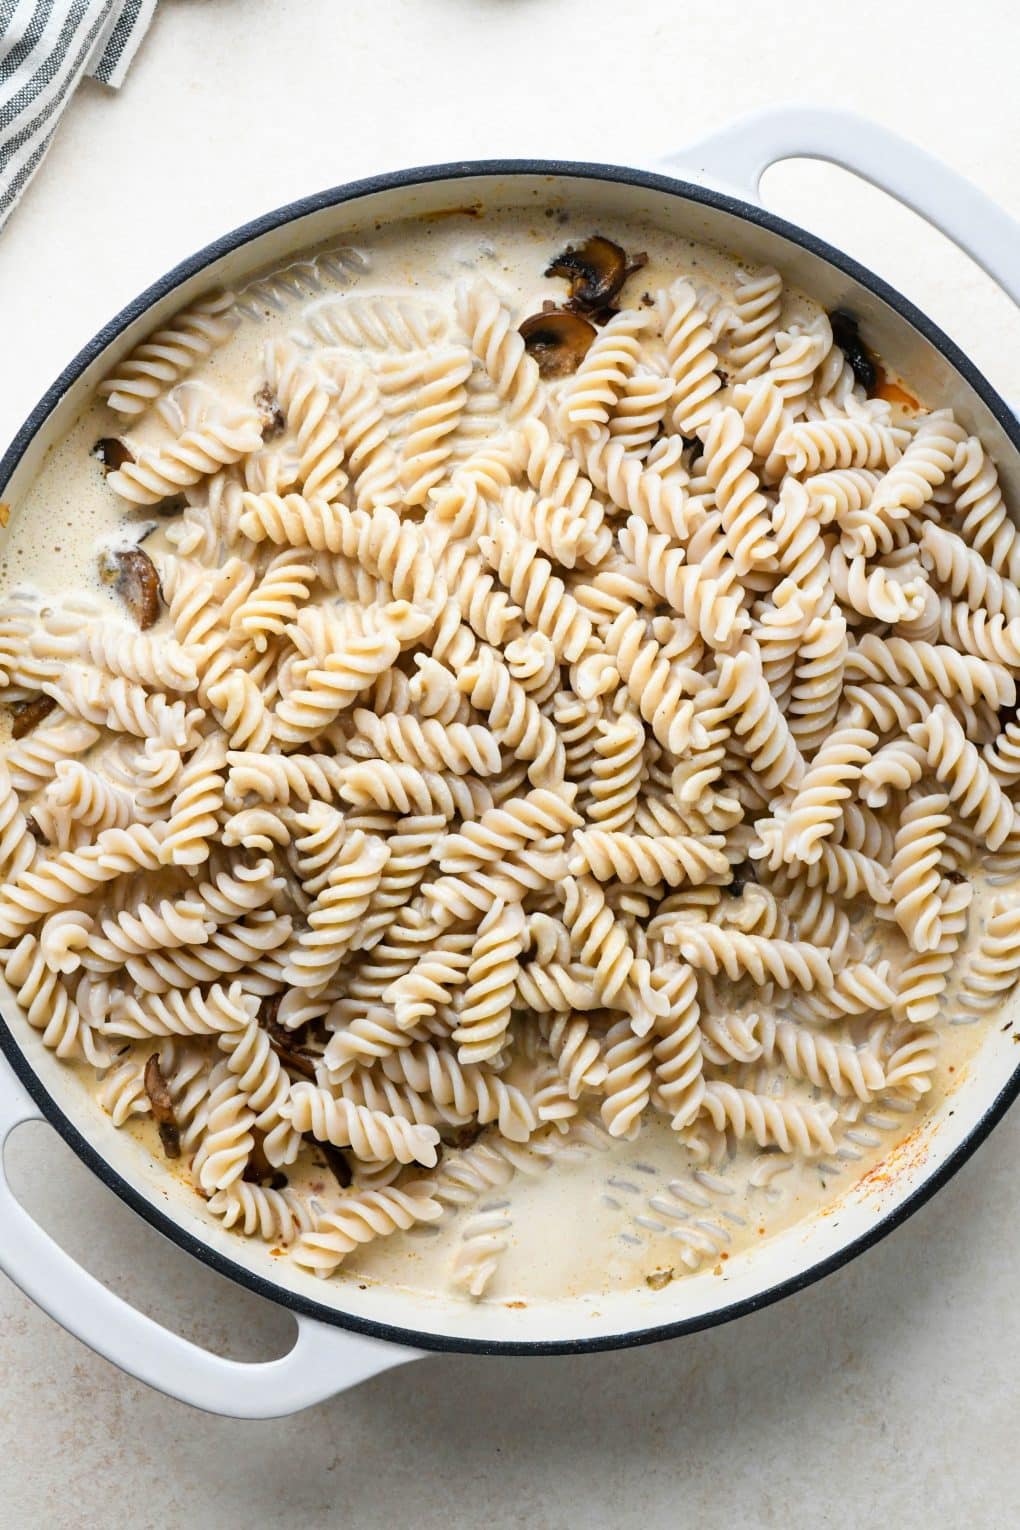 How to make Dairy Free Beef Stroganoff: Cashew cream sauce in the skillet with pasta components before stirring together.